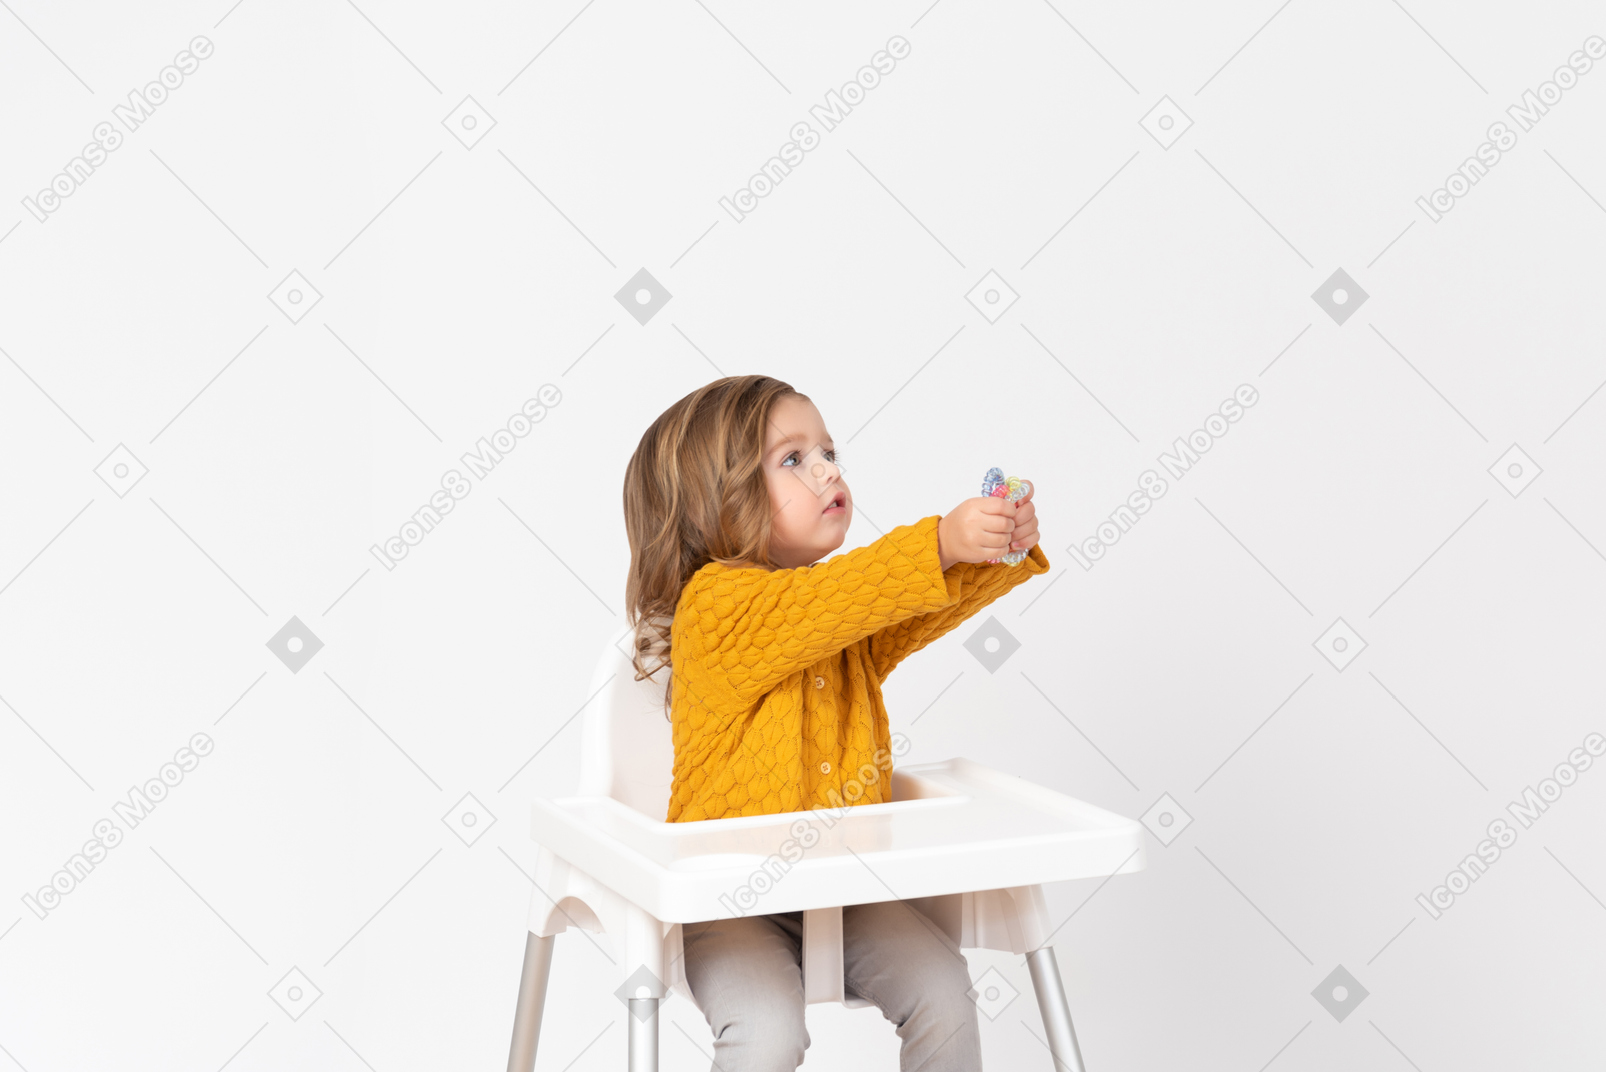 Cute baby girl siting on a highchair